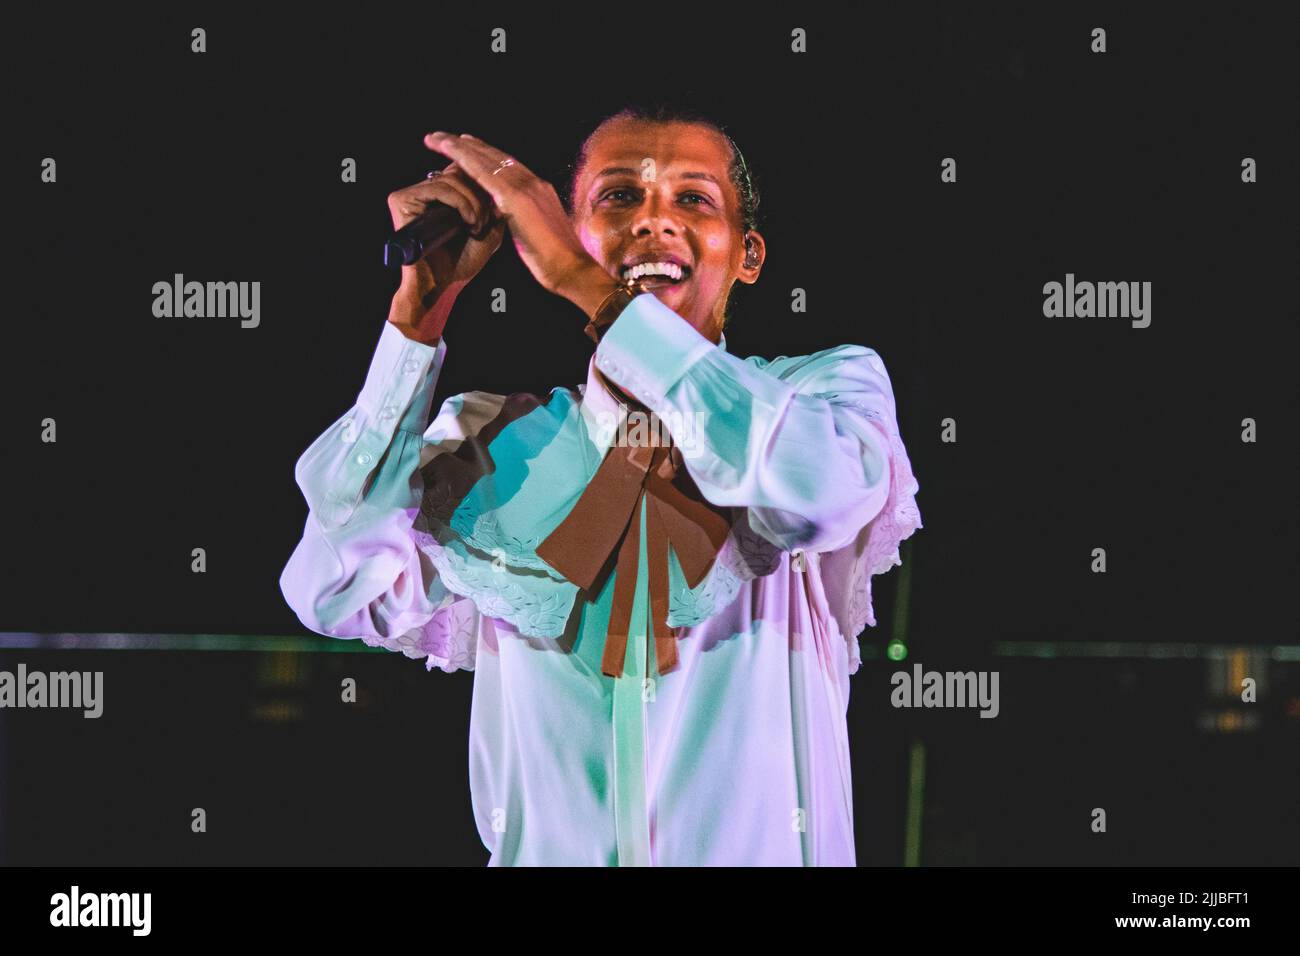 20/07/2022 - Belgian rapper and producer STROMAE performing live at Milano Summer Festival / Ippodromo SNAI, Italy Stock Photo